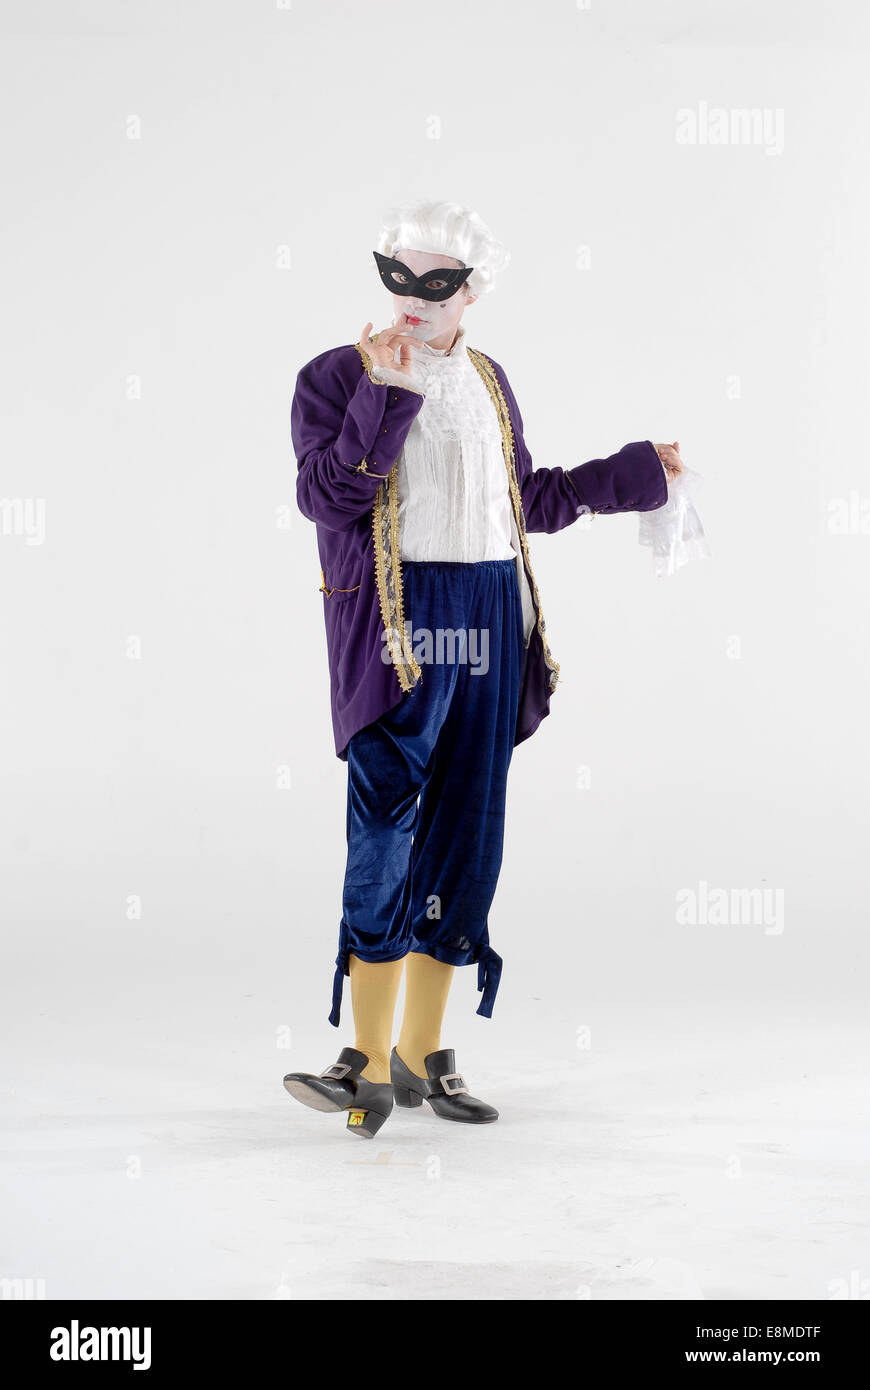 man dressed in fancy dress comedy costume as a historical royal court foppish figure with make up  and mask and full outfit Stock Photo